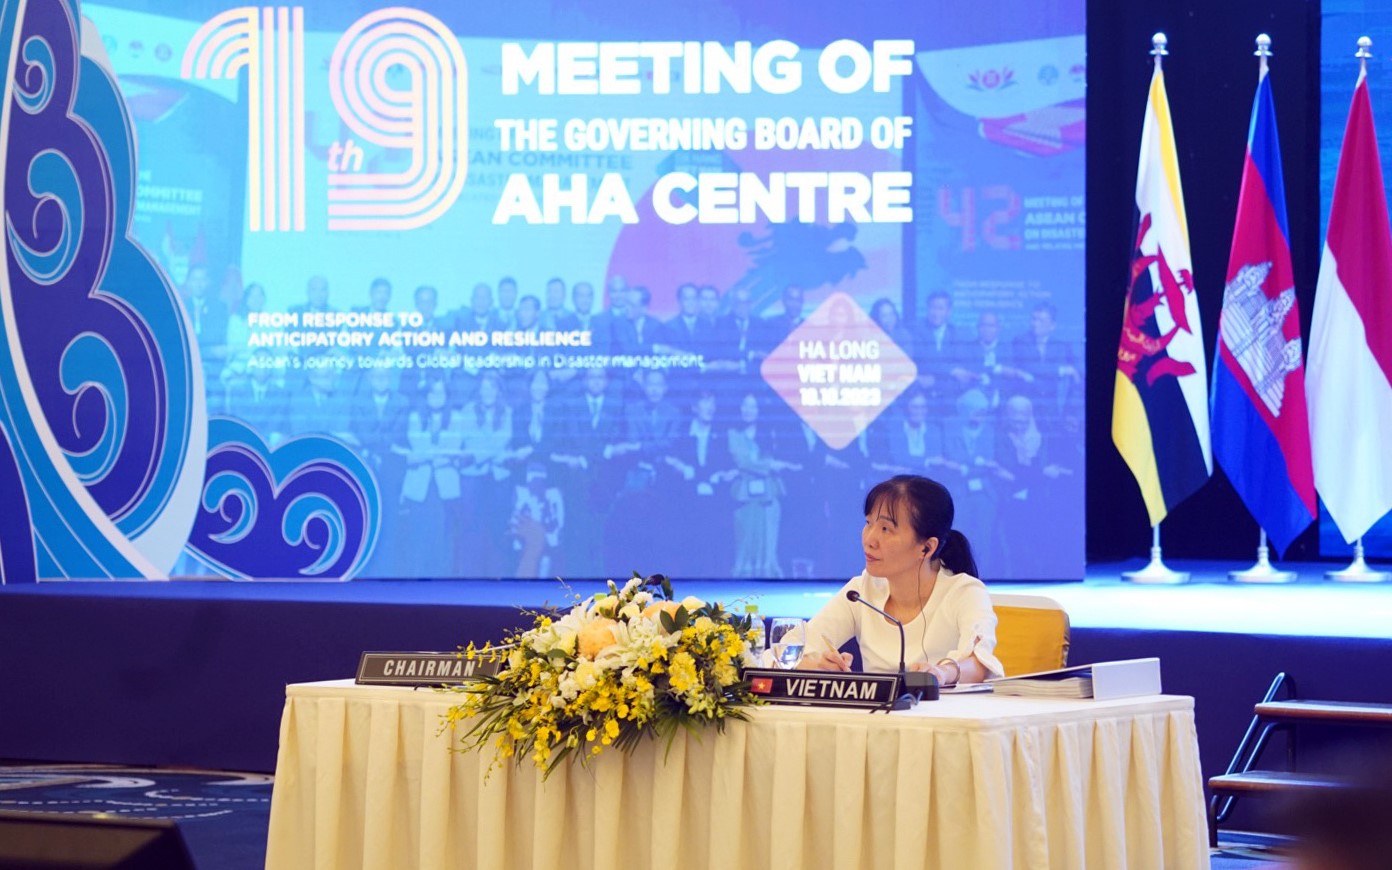 Ms. Doan Thi Tuyet Nga, representative of the host country, Vietnam, chaired the meeting. Photo: Quang Dung.